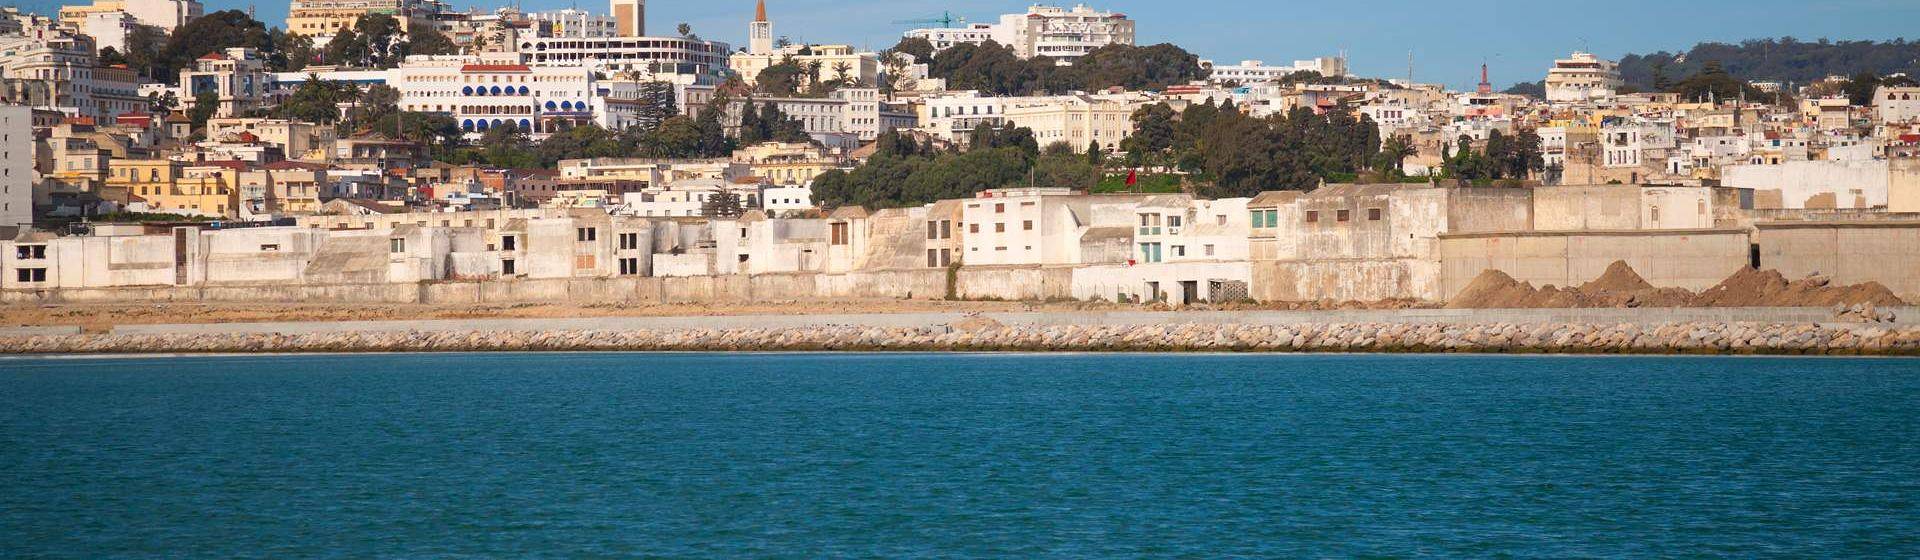 Holidays to Tangier Image